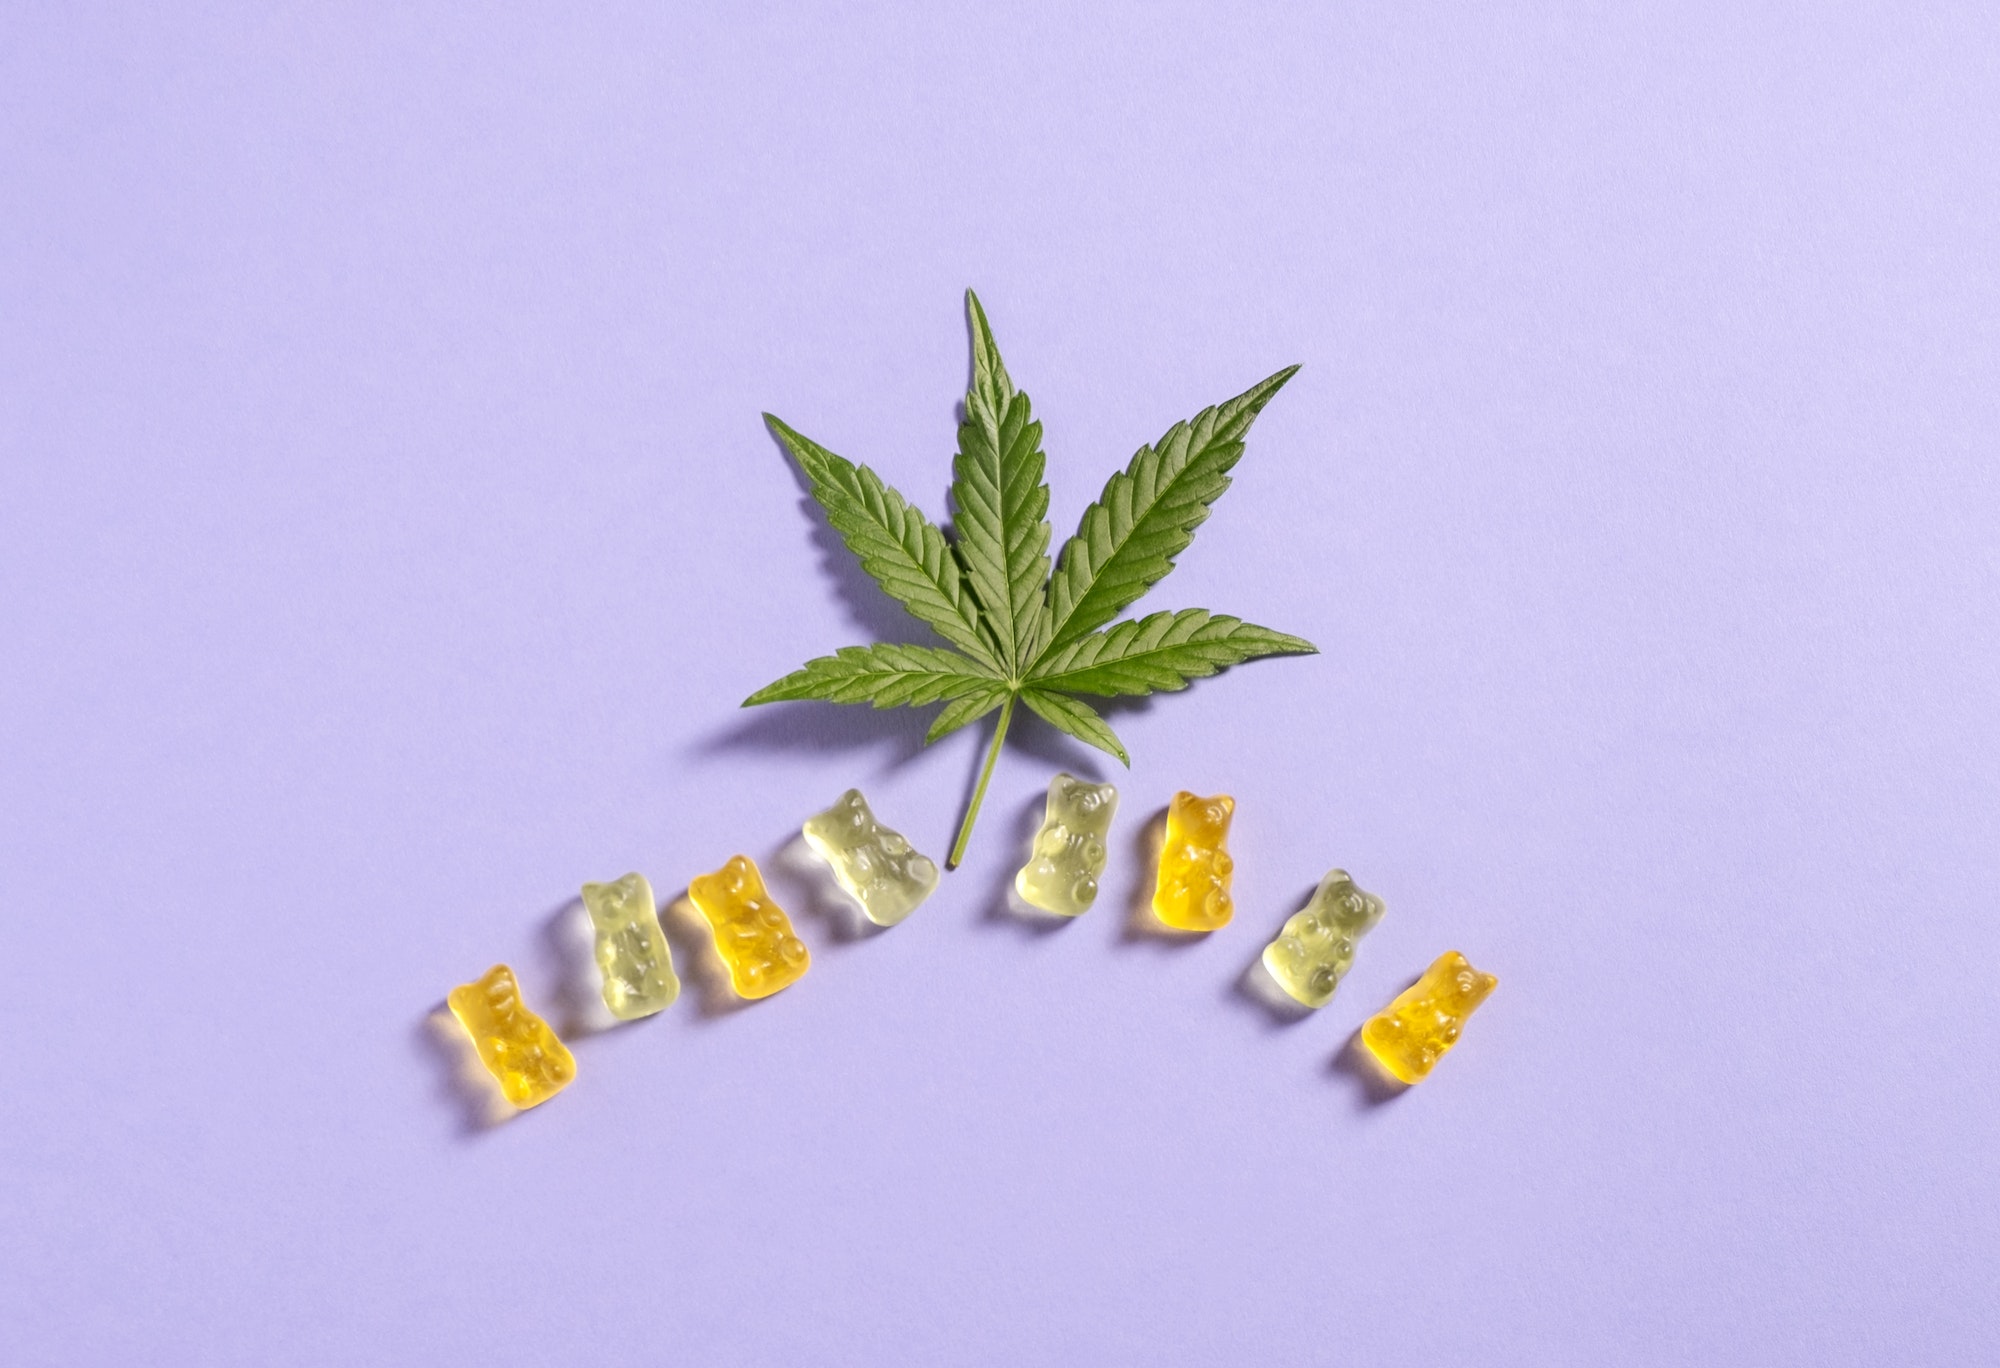 Top view colorful gummy bears and cannabis leaves on light violet background. Copy space.